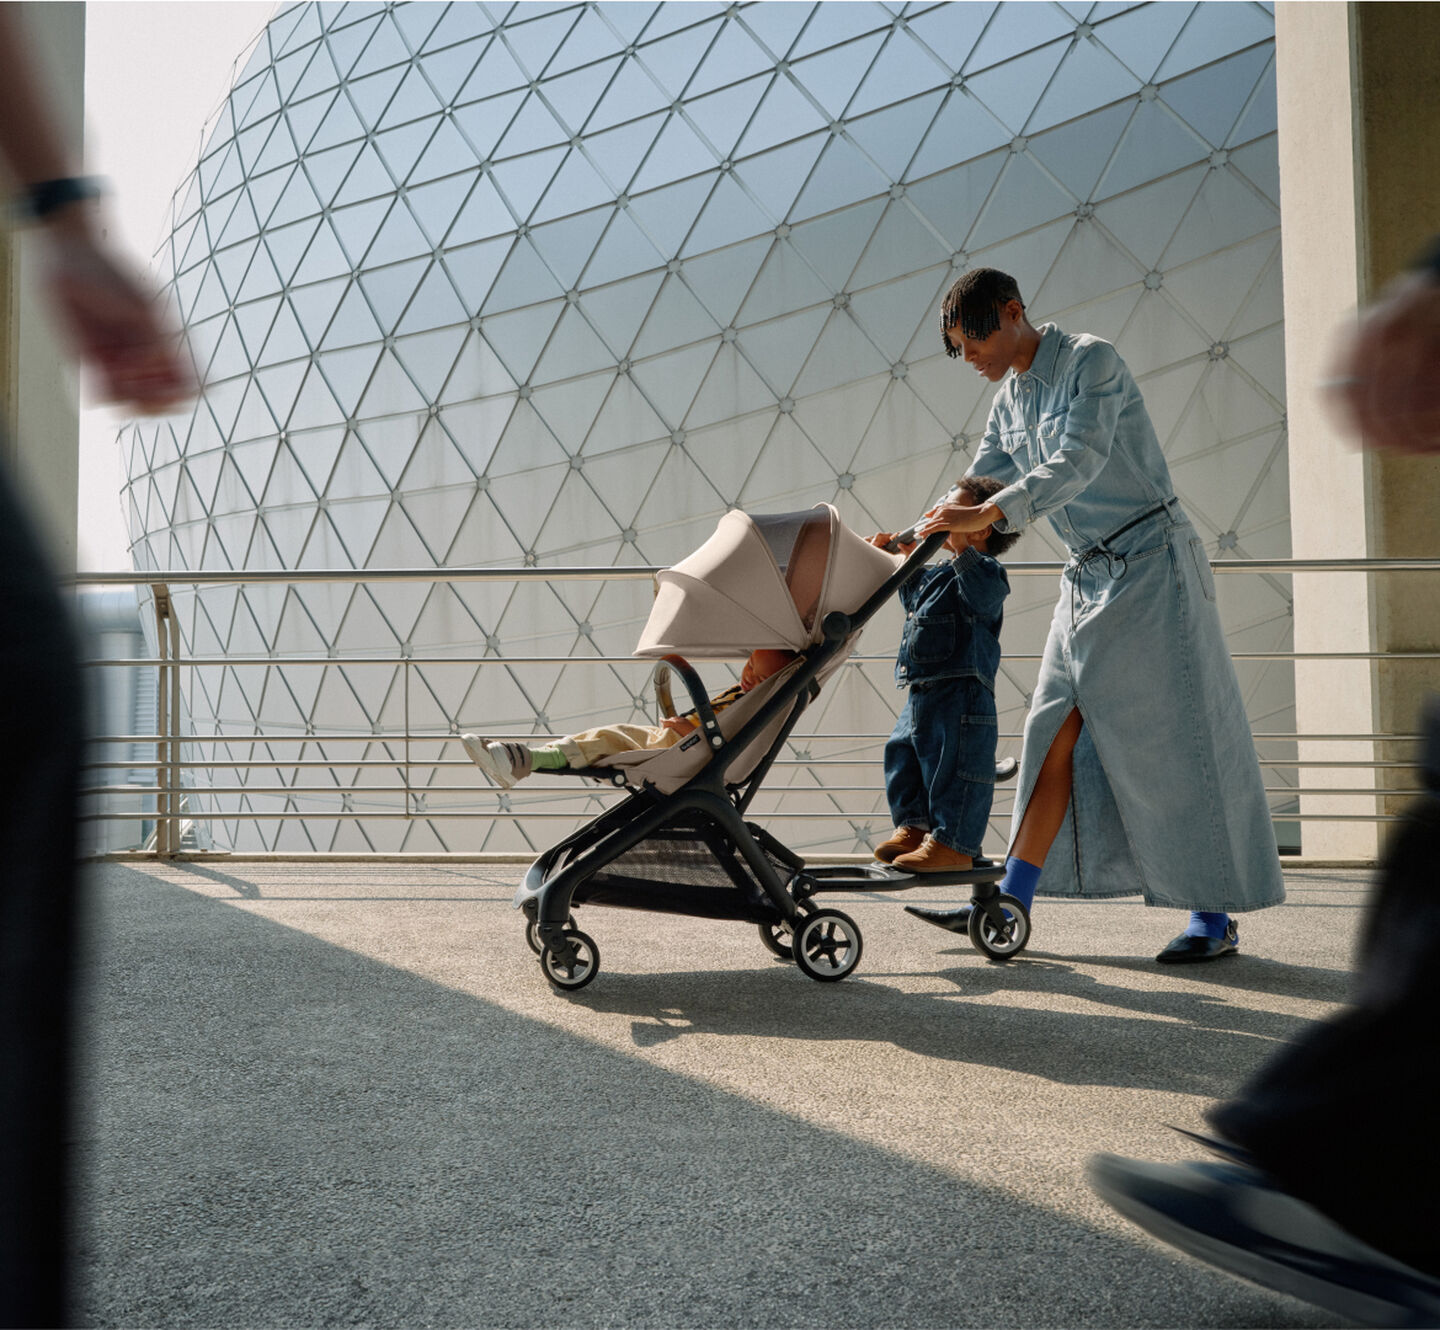 A stylish mom walks with her baby in a Bugaboo Butterfly travel stroller, while her toddler rides along on the wheeled board.